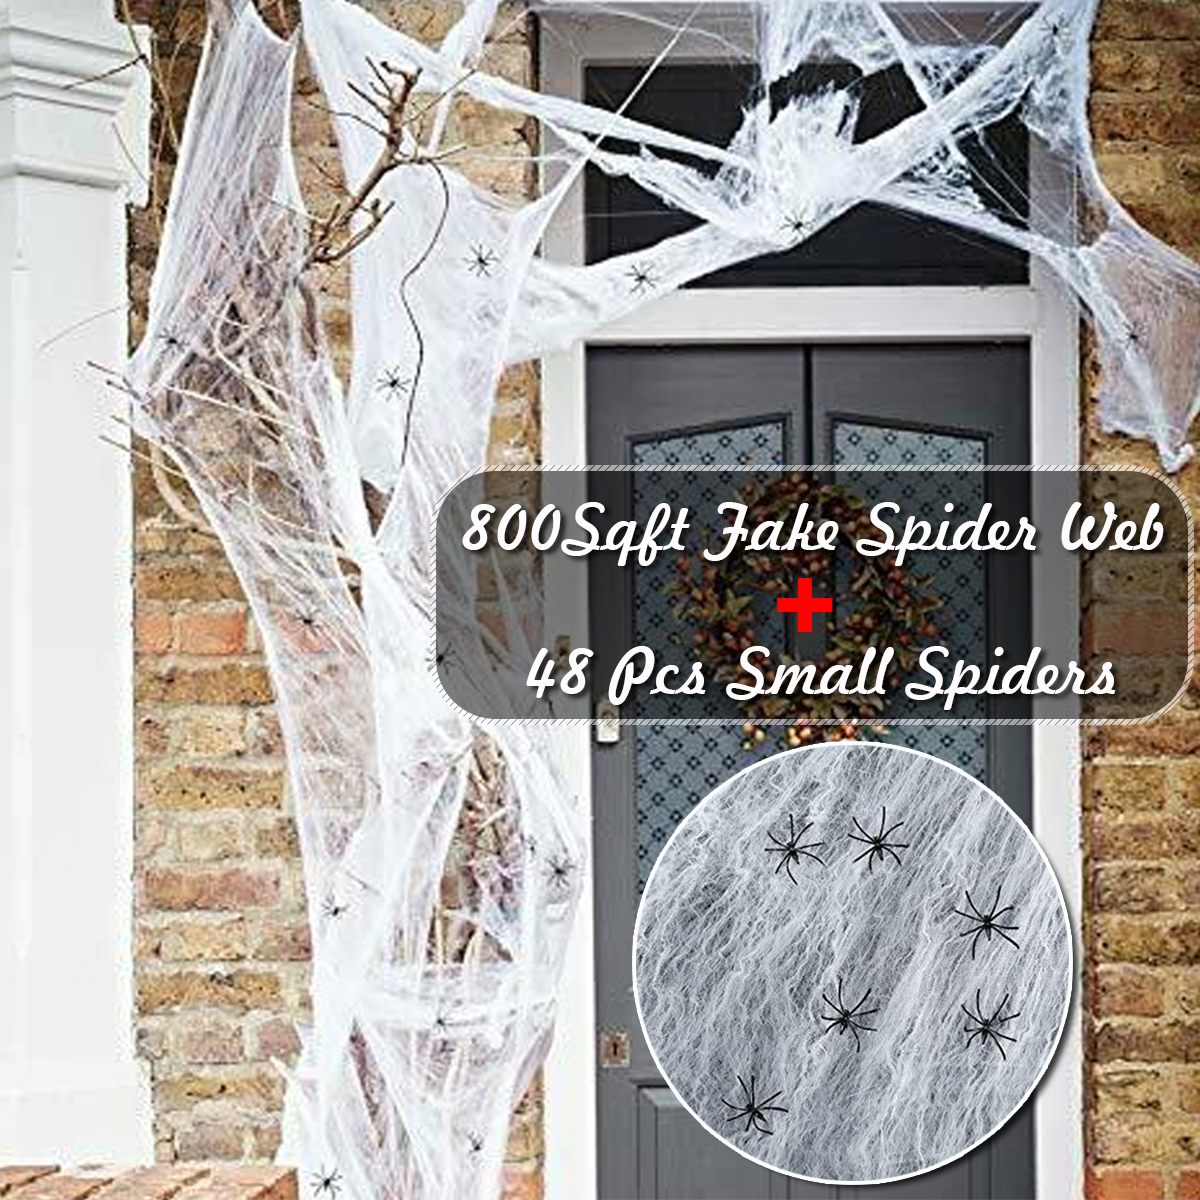 250g-Spider-Web-With-48Pcs-Small-Spiders-Halloween-Outdoor-Party-Decorations-Props-Supplies-1730880-2